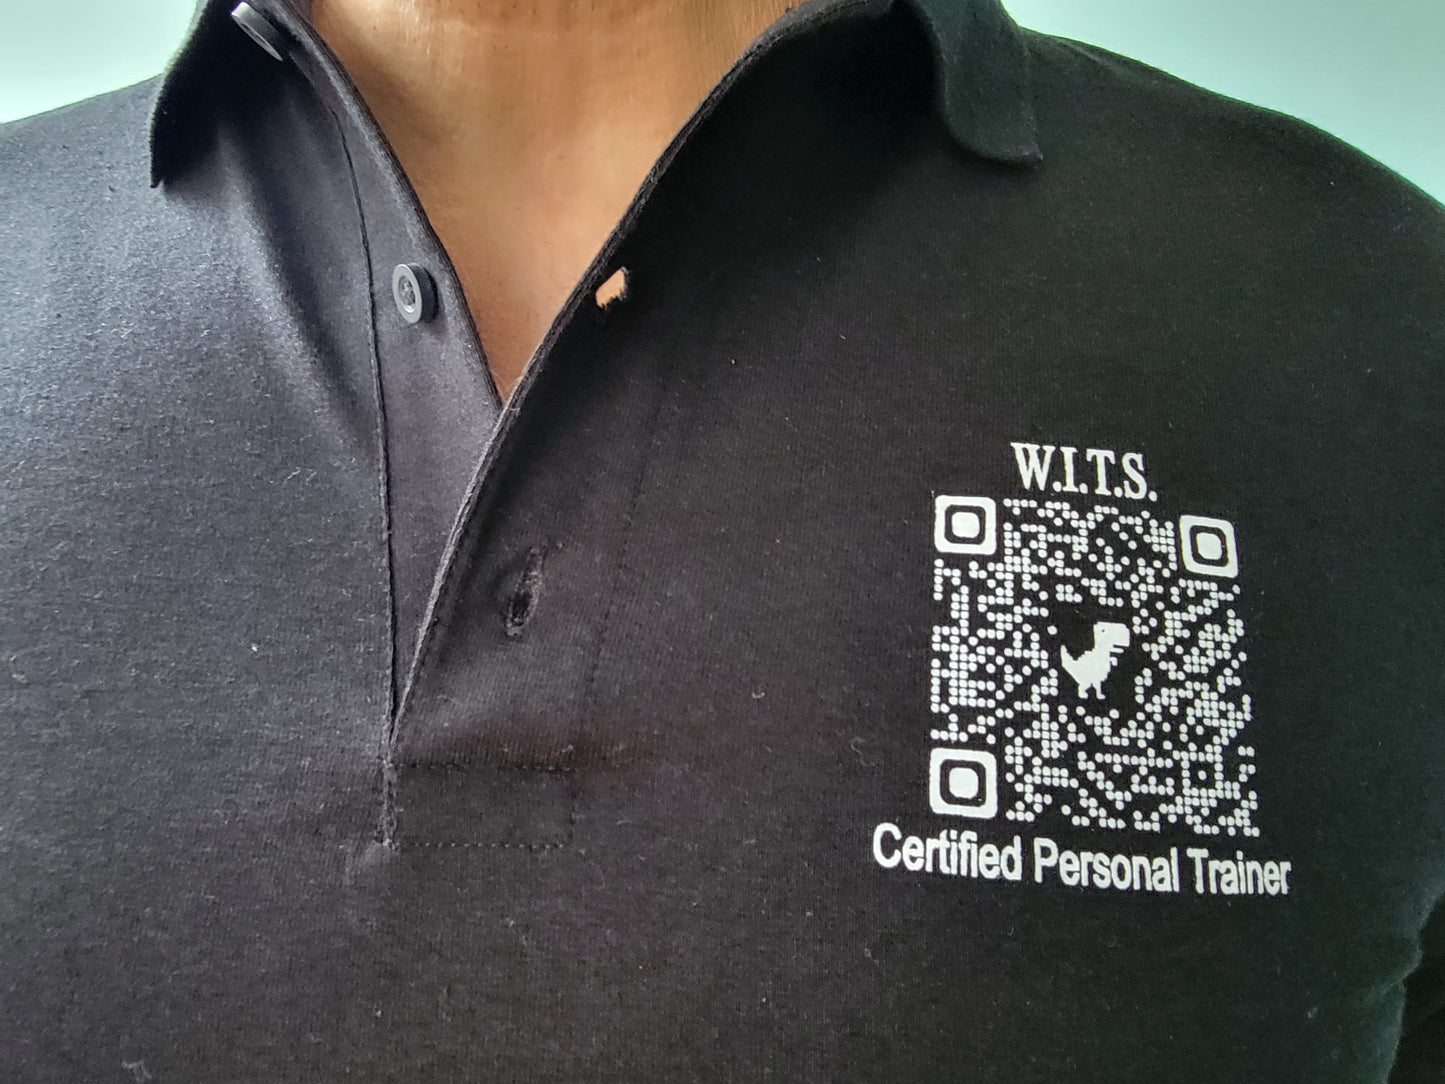 W.I.T.S. Certified Polo Professional Shirt - New